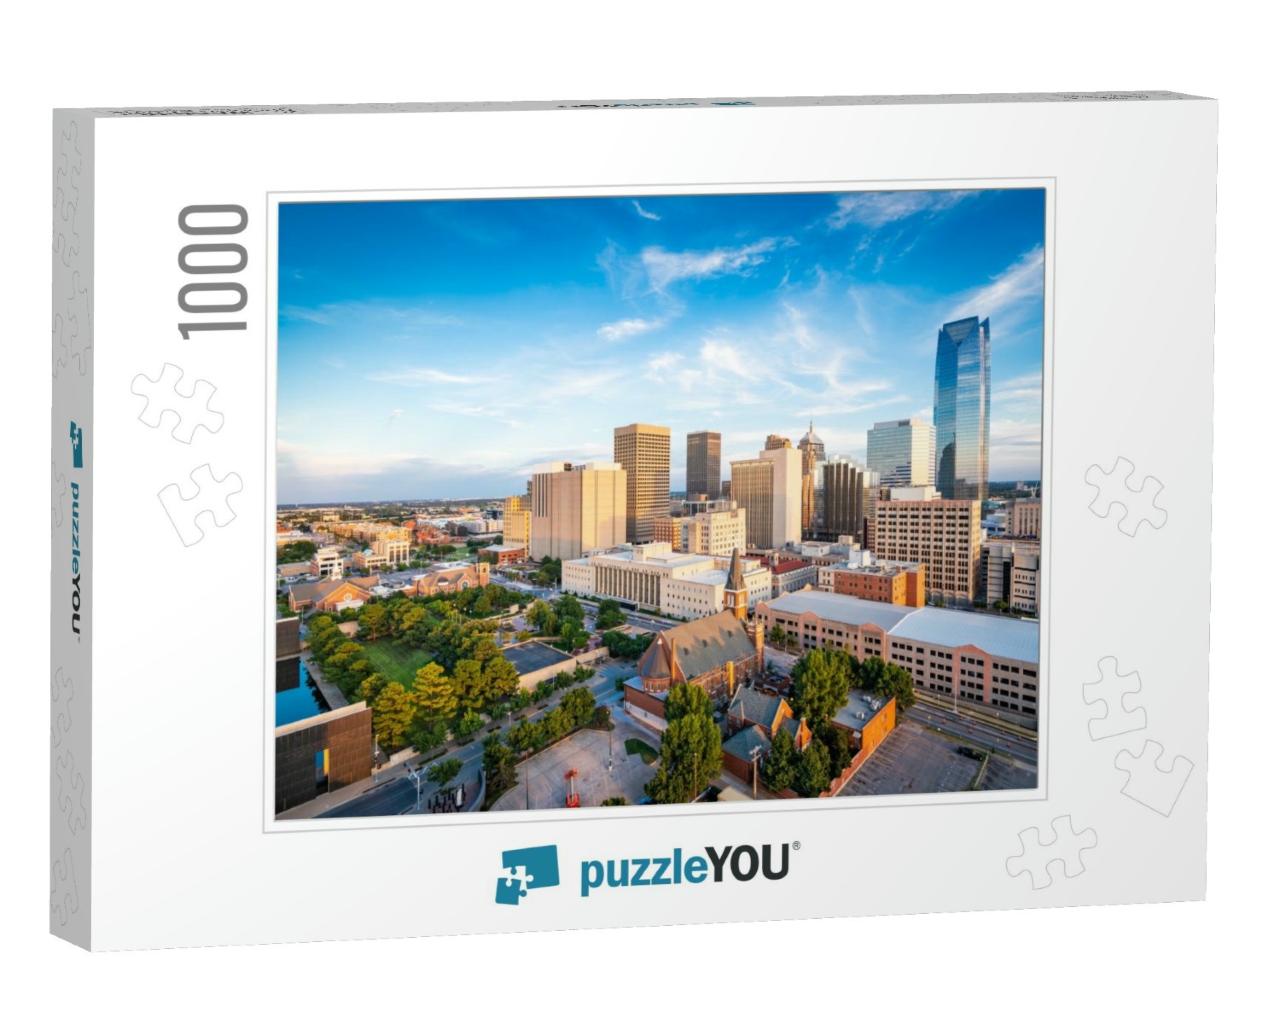 Oklahoma City, Oklahoma, USA Downtown Skyline in the After... Jigsaw Puzzle with 1000 pieces